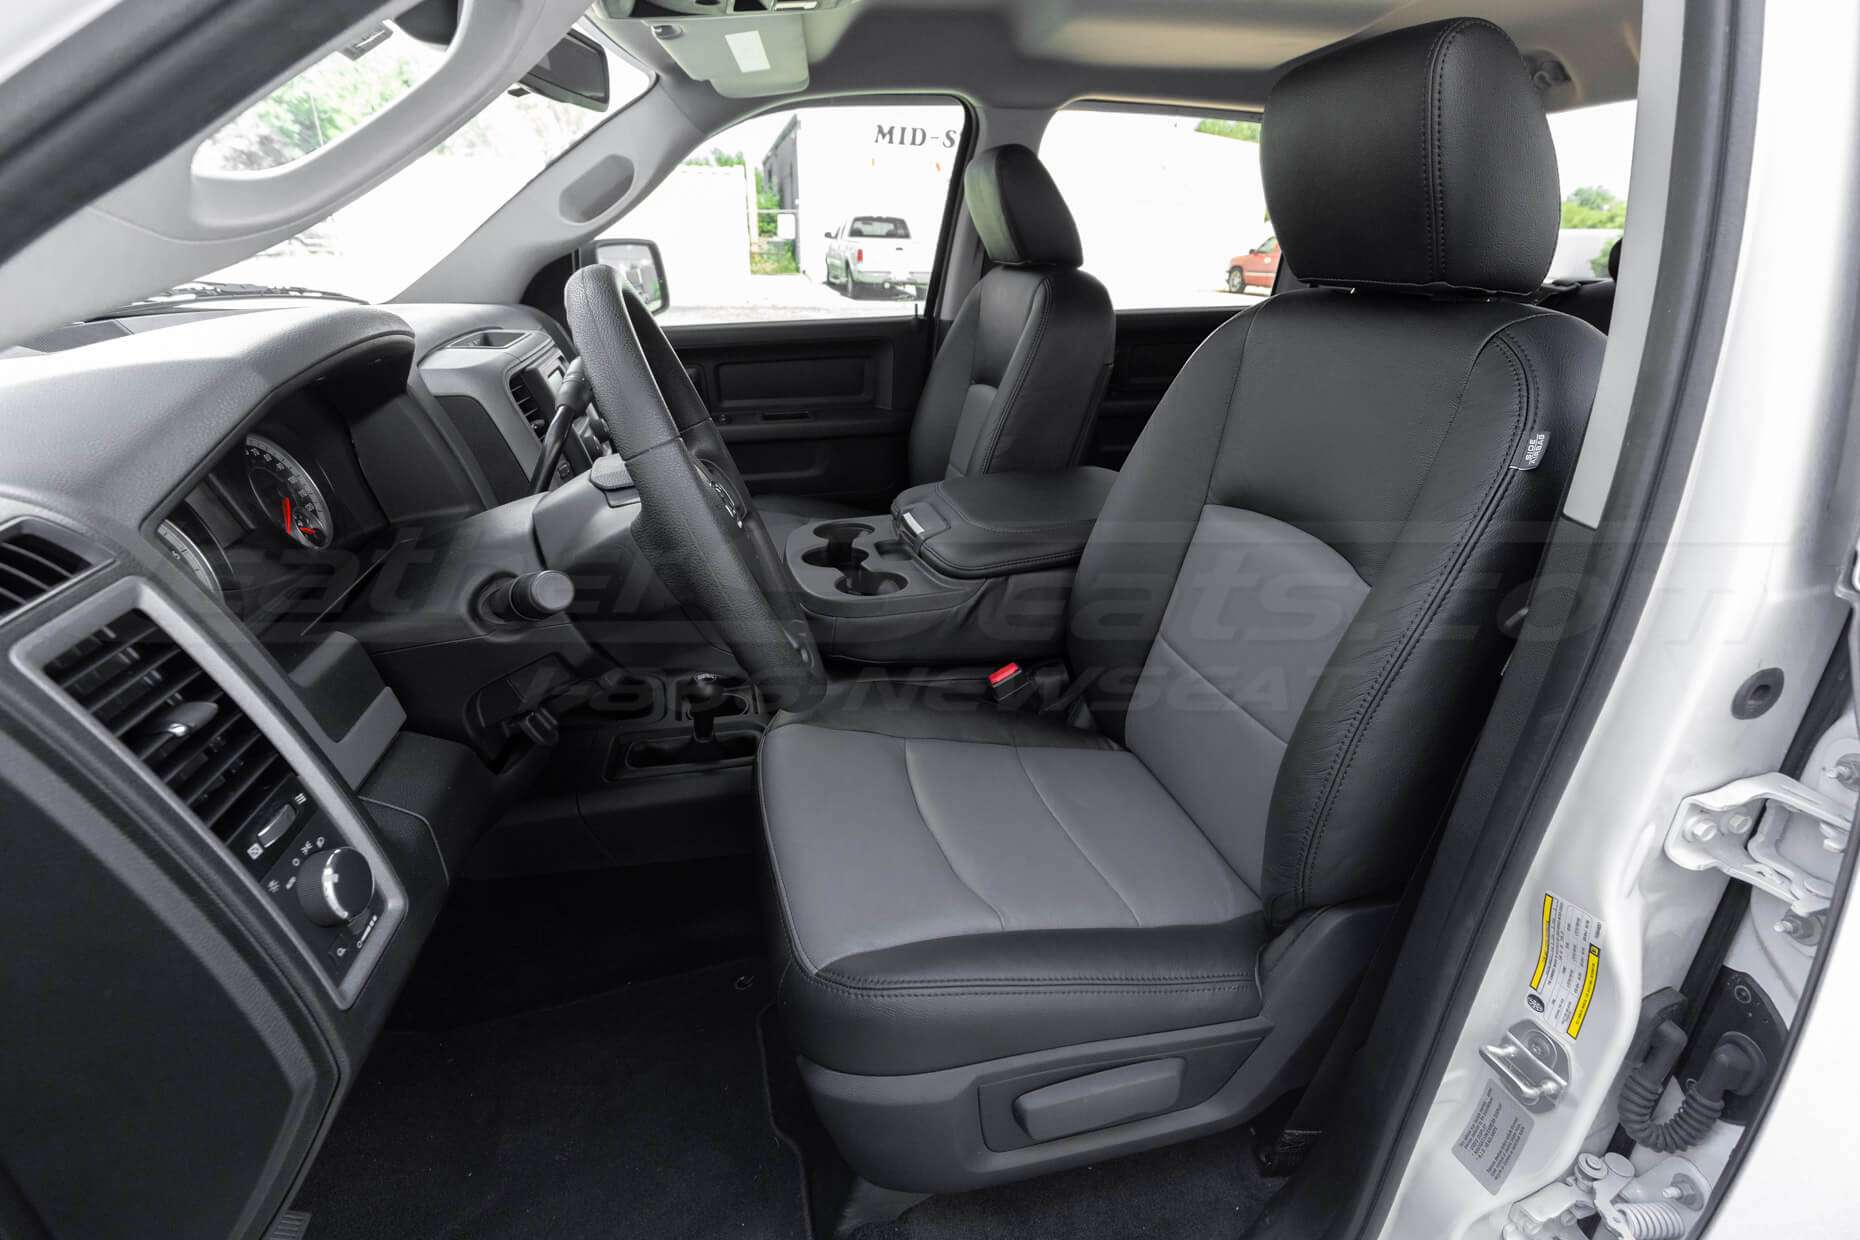 Two-Tone Dodge Ram leather seats in Black & Lapis - Front seat with middle seat down